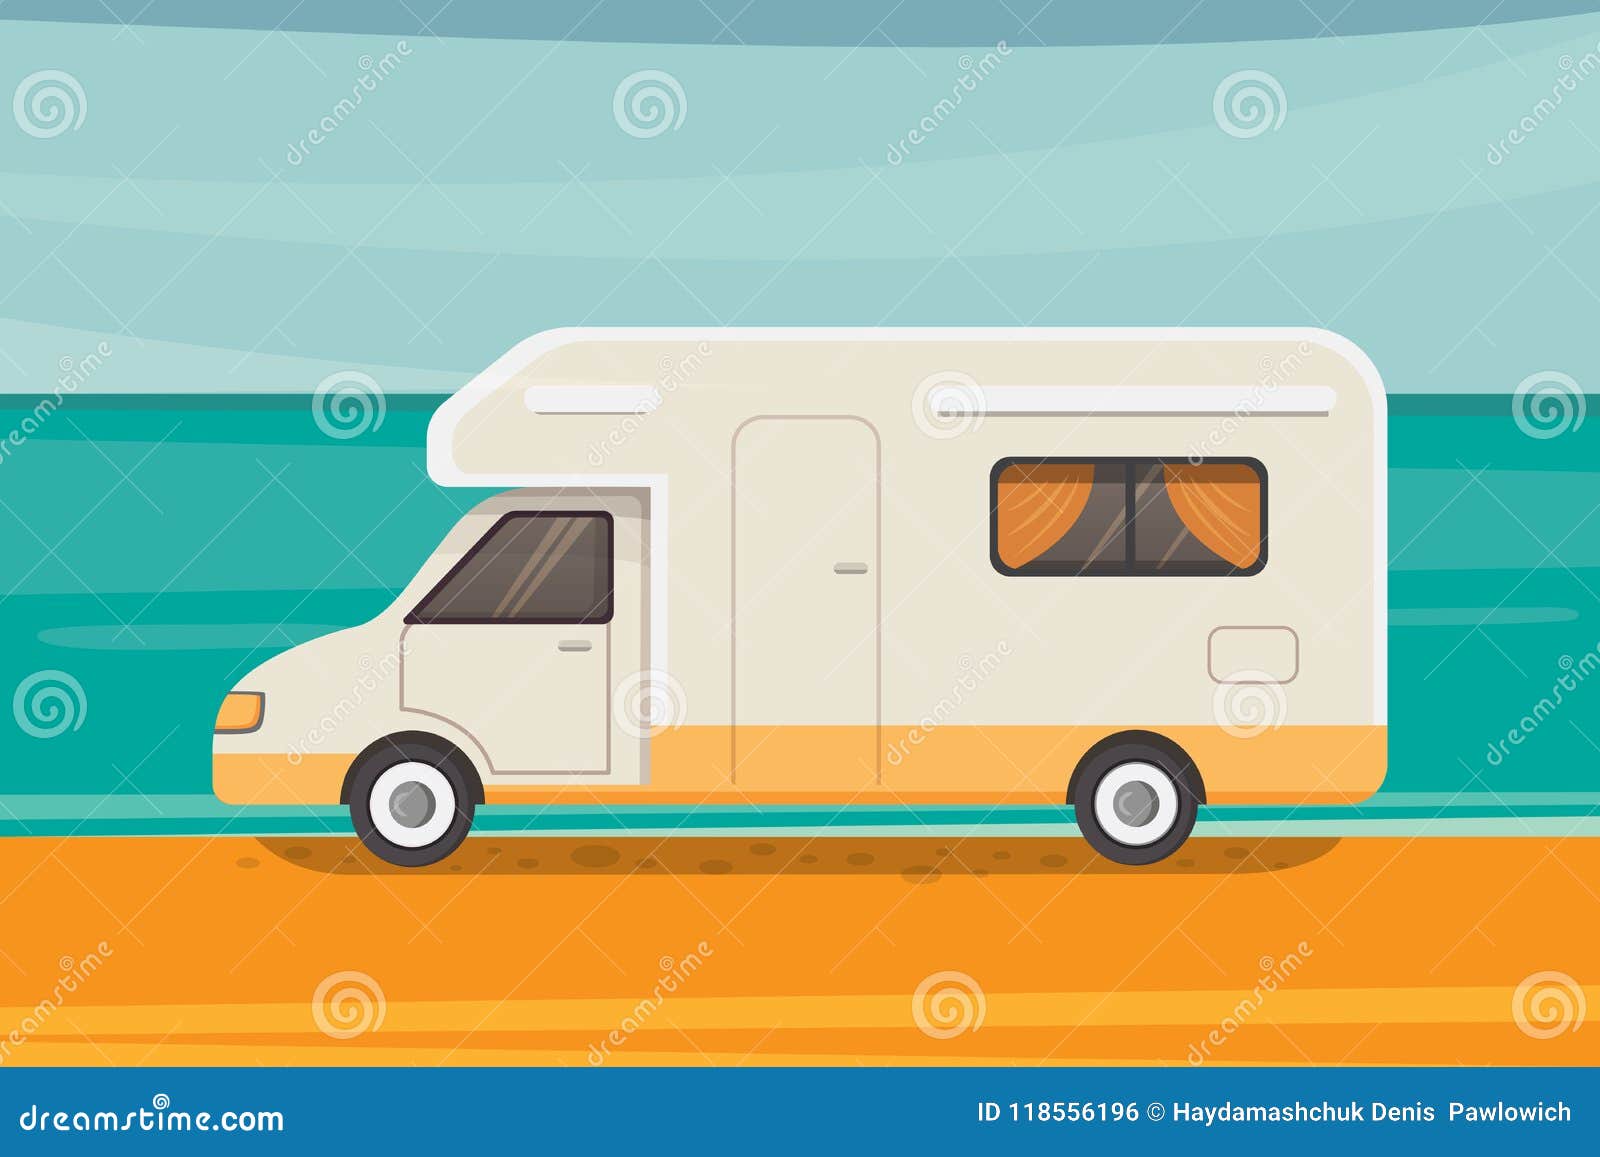 Camping on tropical beach. Summer travel, camper trailer vector illustration.